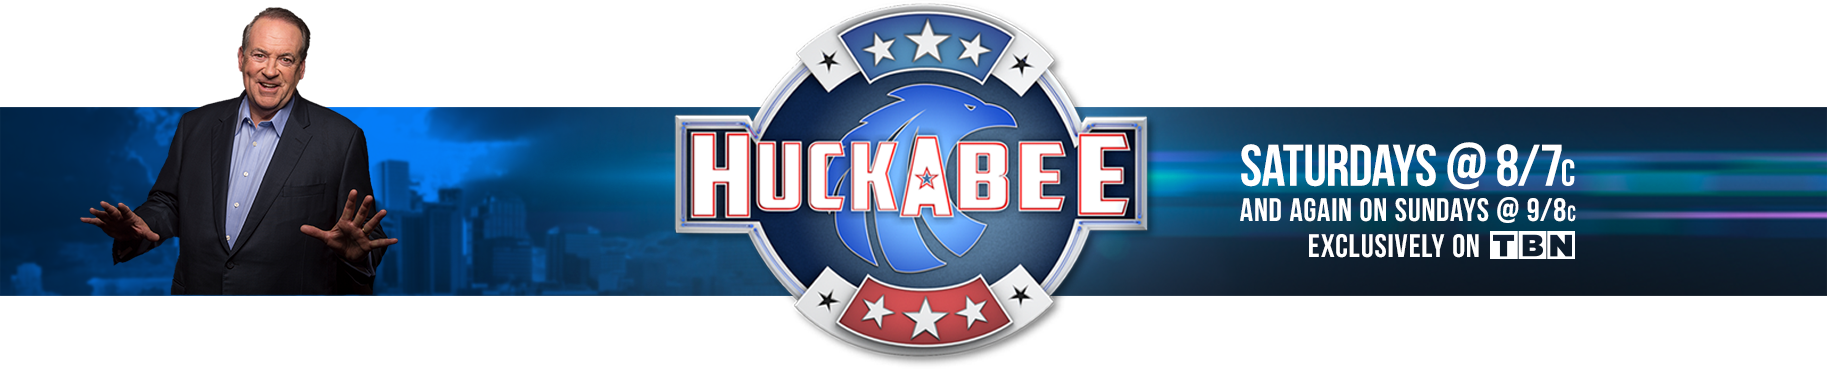 Tune in for Huckabee on TBN